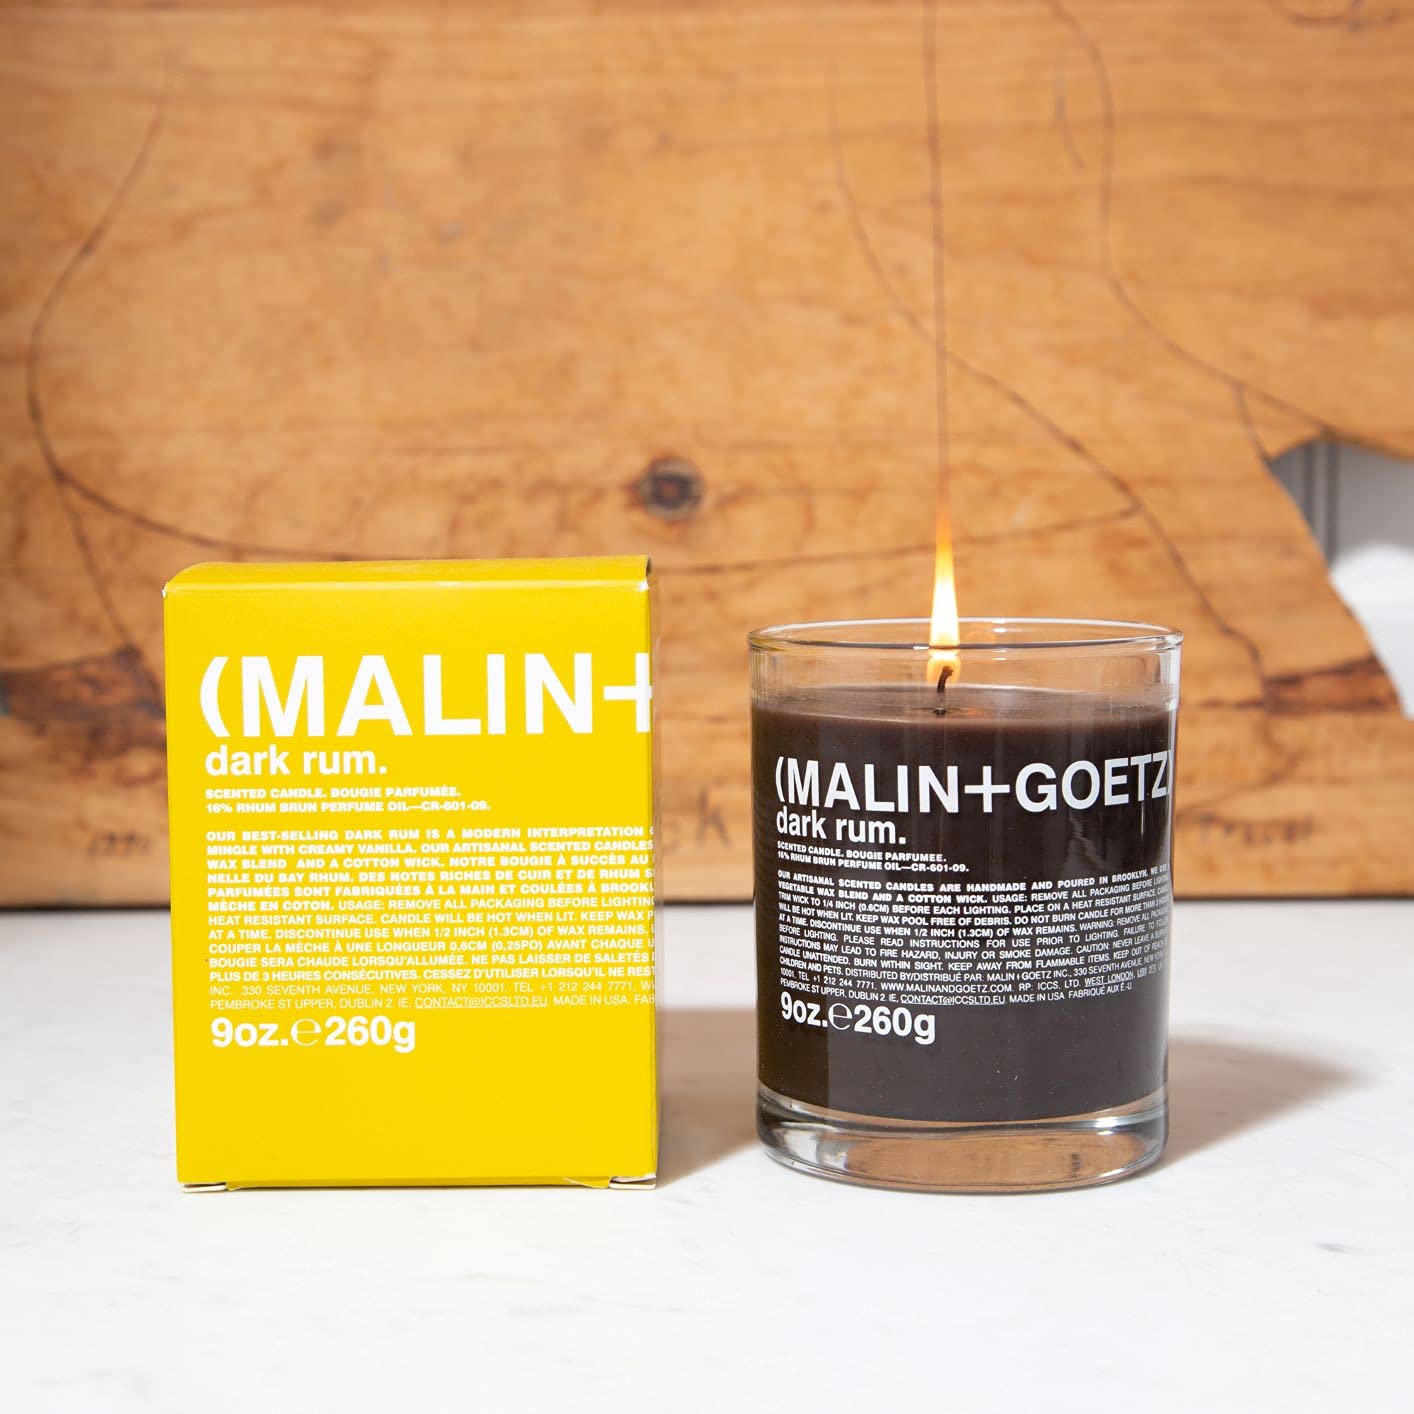 Malin+Goetz Highly Scented, Long Lasting, Slow Burn, All Natural, Hand Poured, Luxury Wax Blend, Aromatic Candles and Gift Set, 60 Hours, 9oz